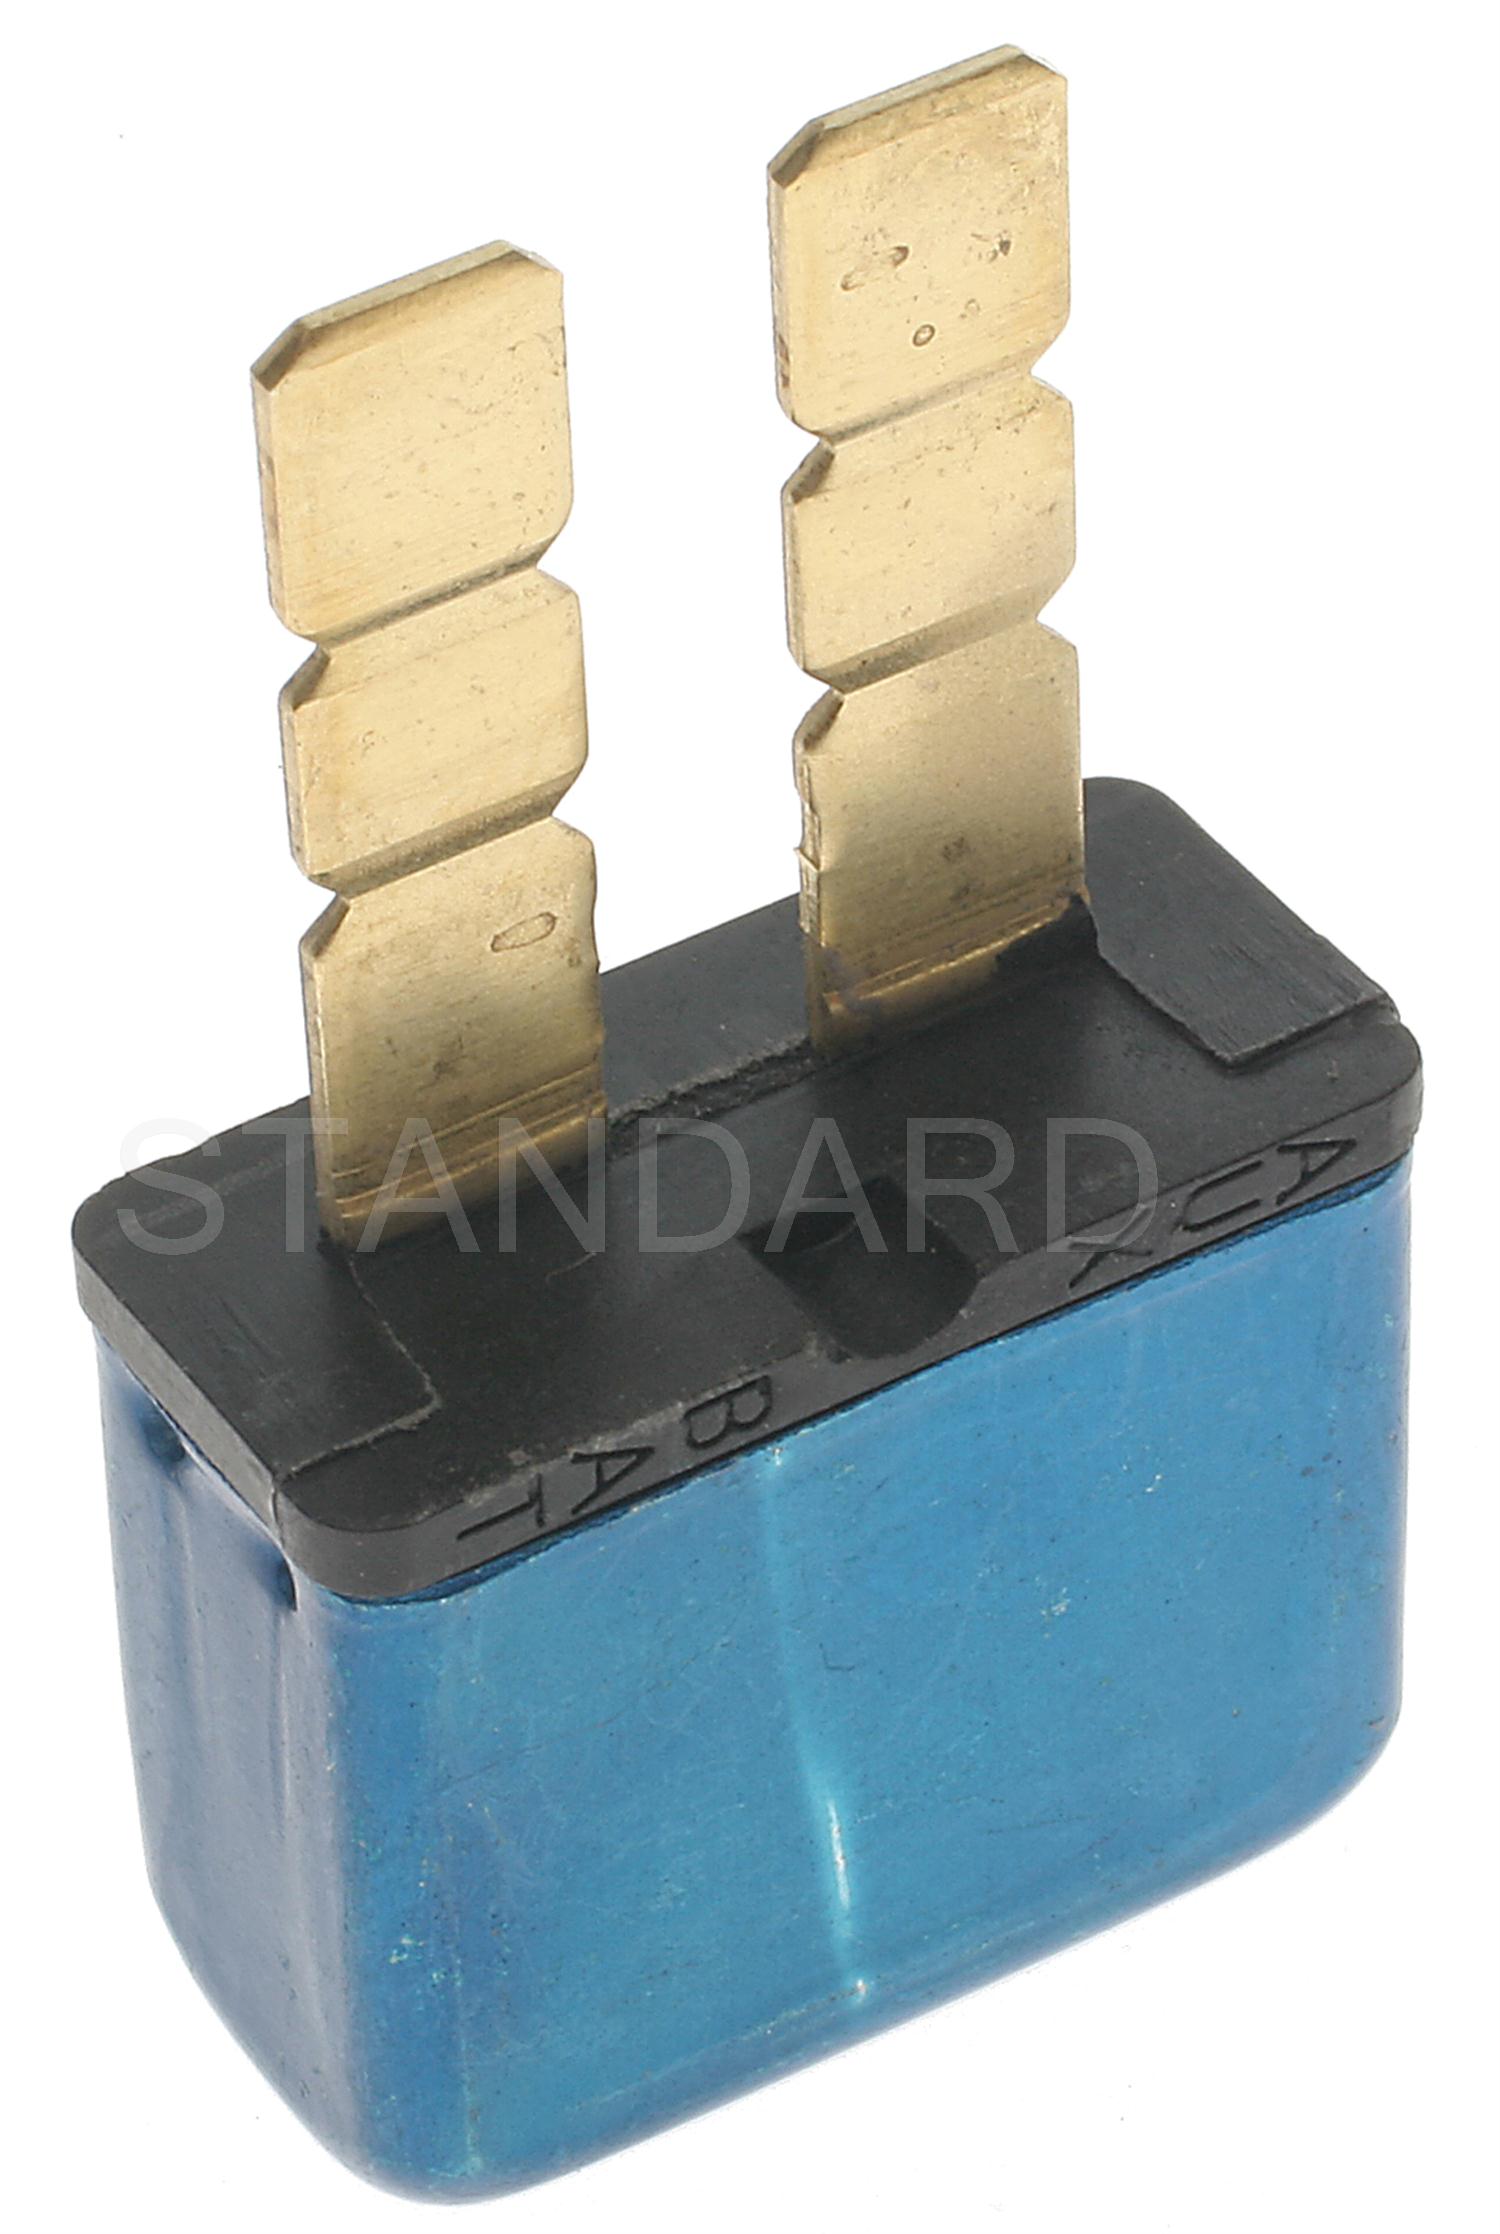 Picture of Standard Motor Products BR315 Circuit Breaker